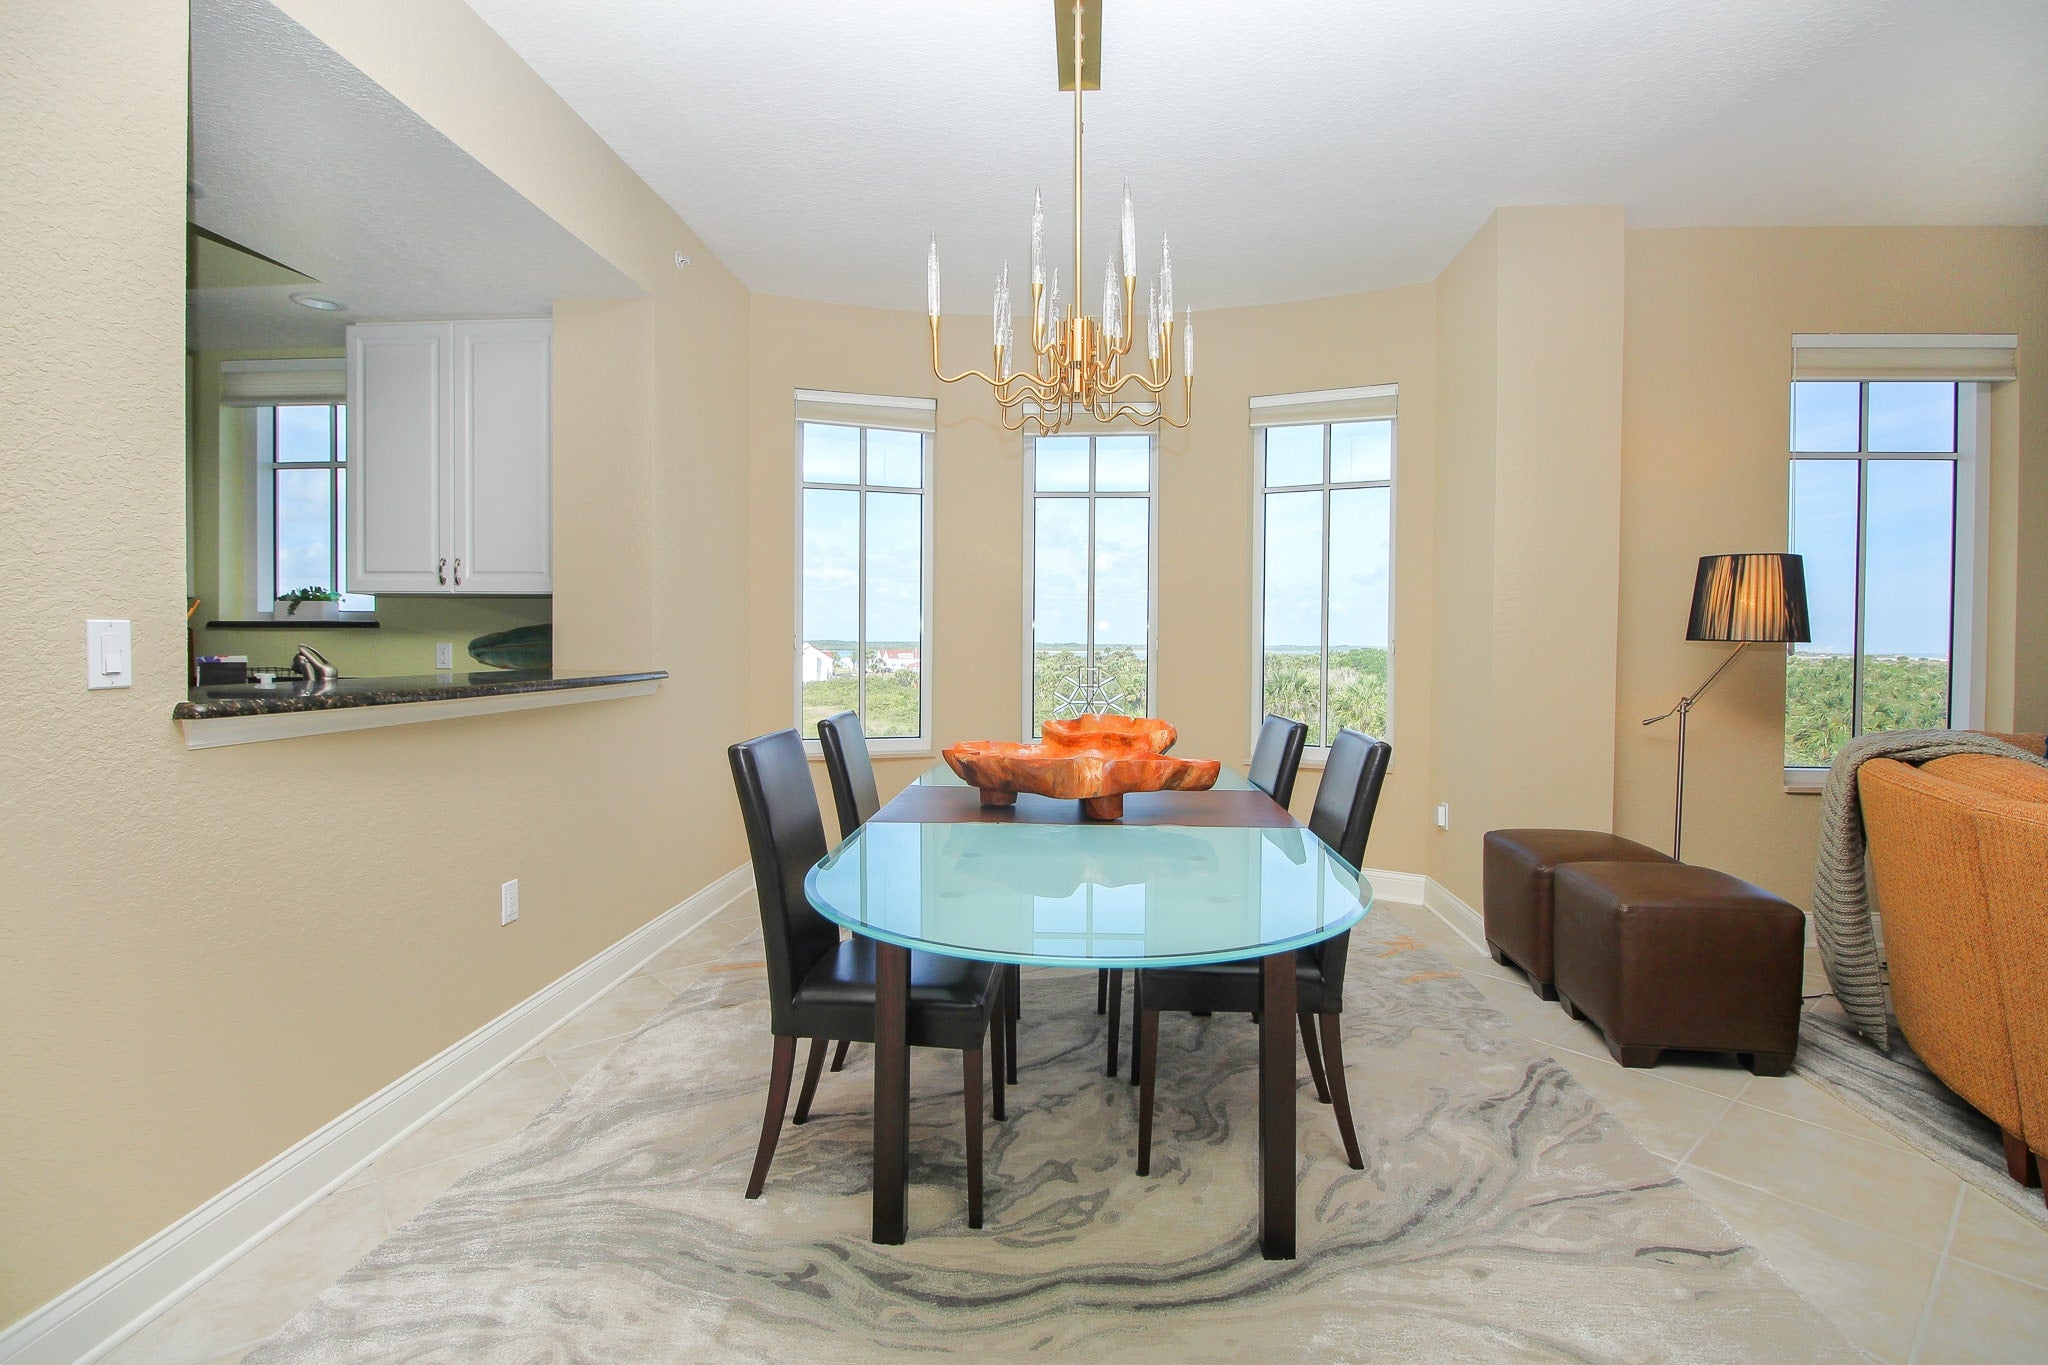 Ample space is this upscale dining room